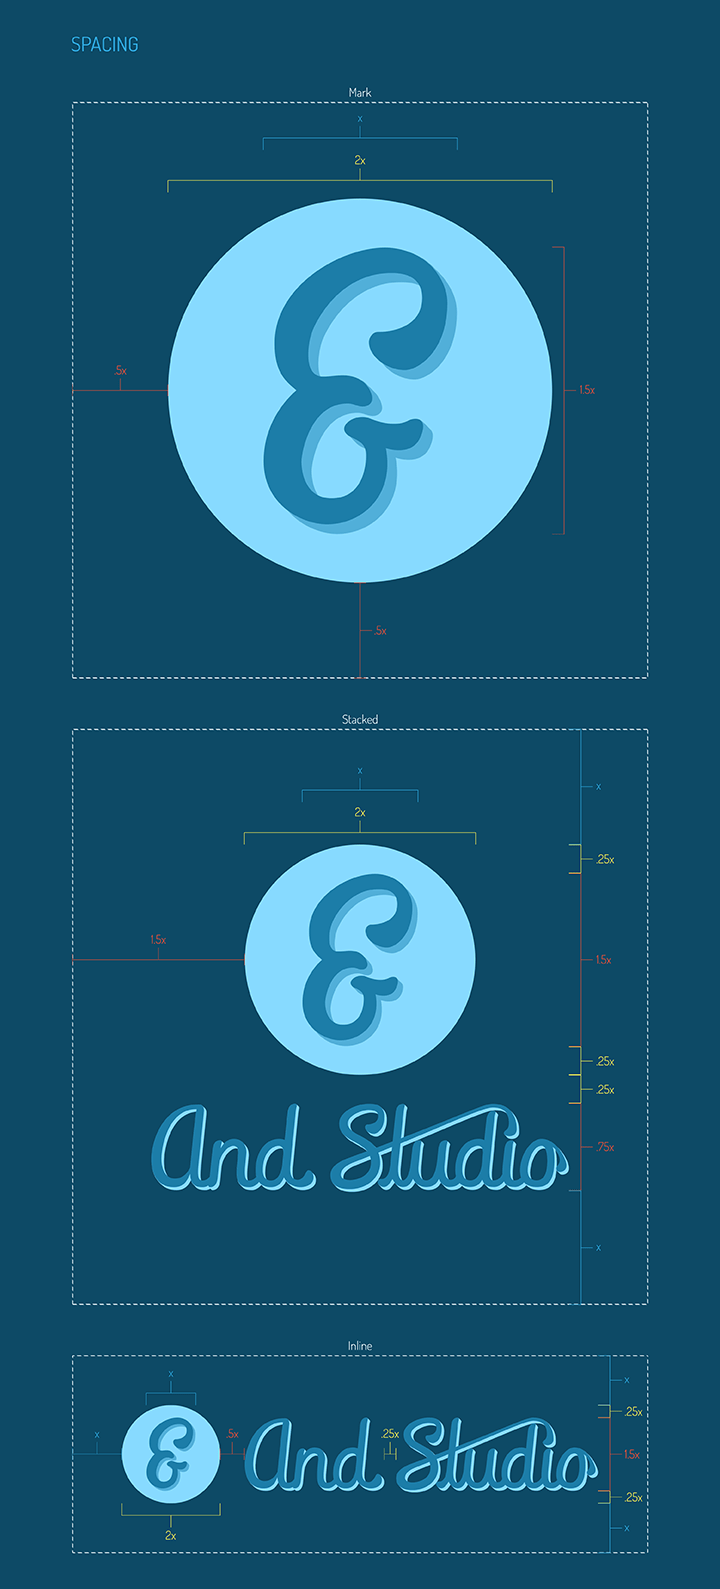 Brand Style Guide - And Studio - Spacing